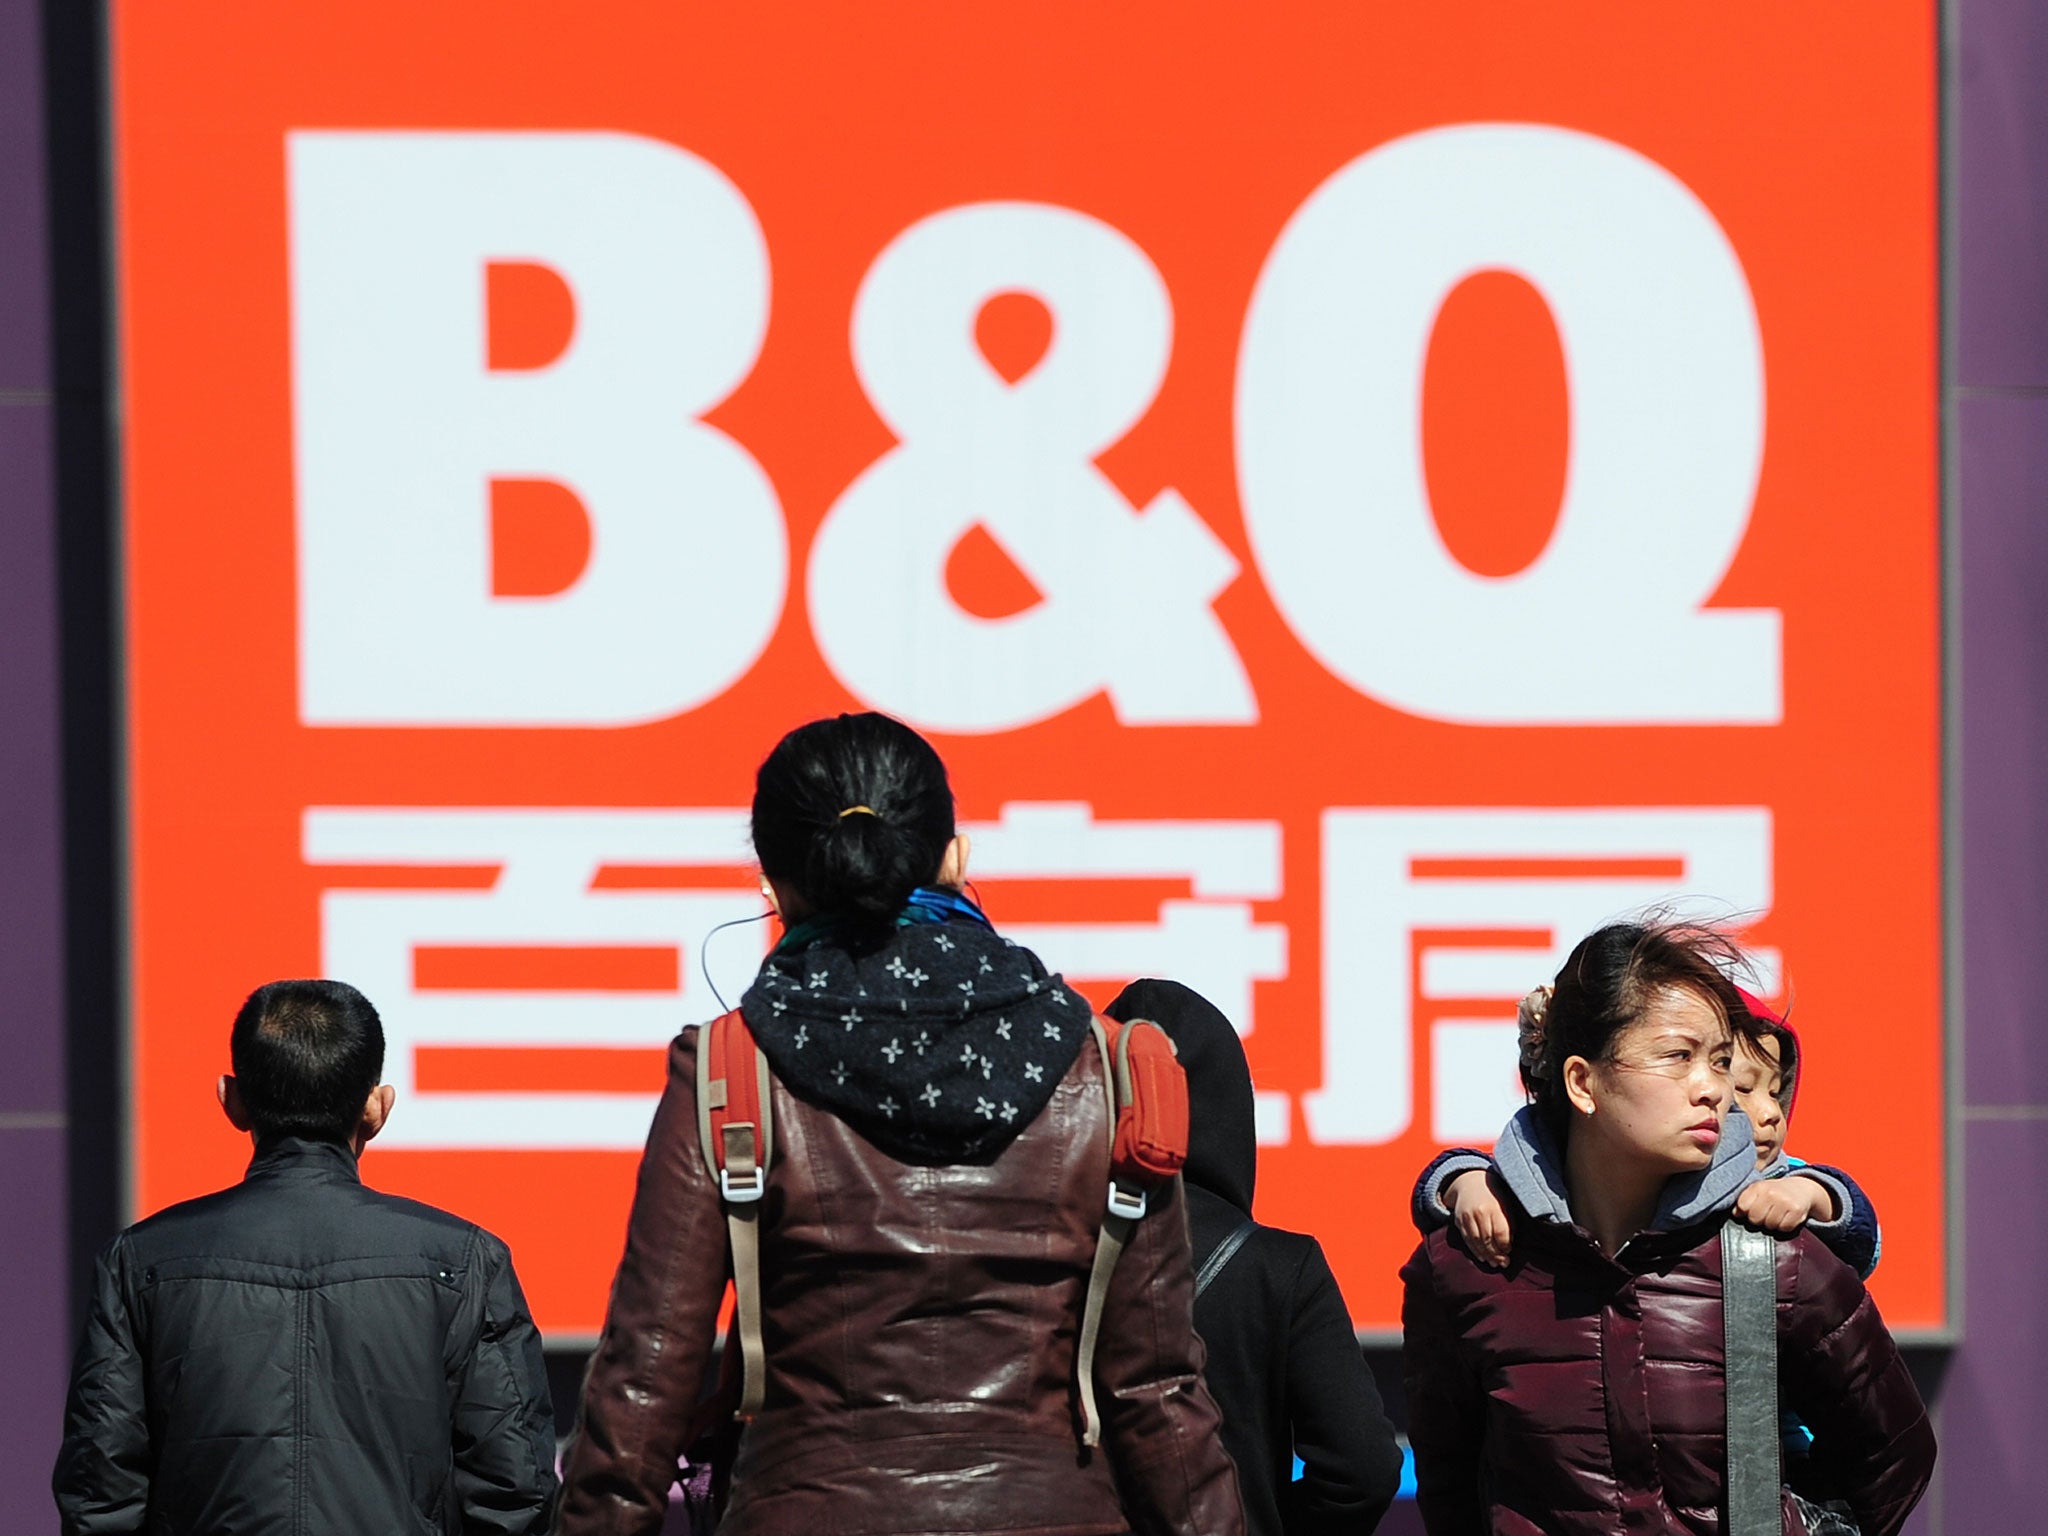 The deal is the first test for Veronique Laury, the new chief executive of B&Q owner Kingfisher